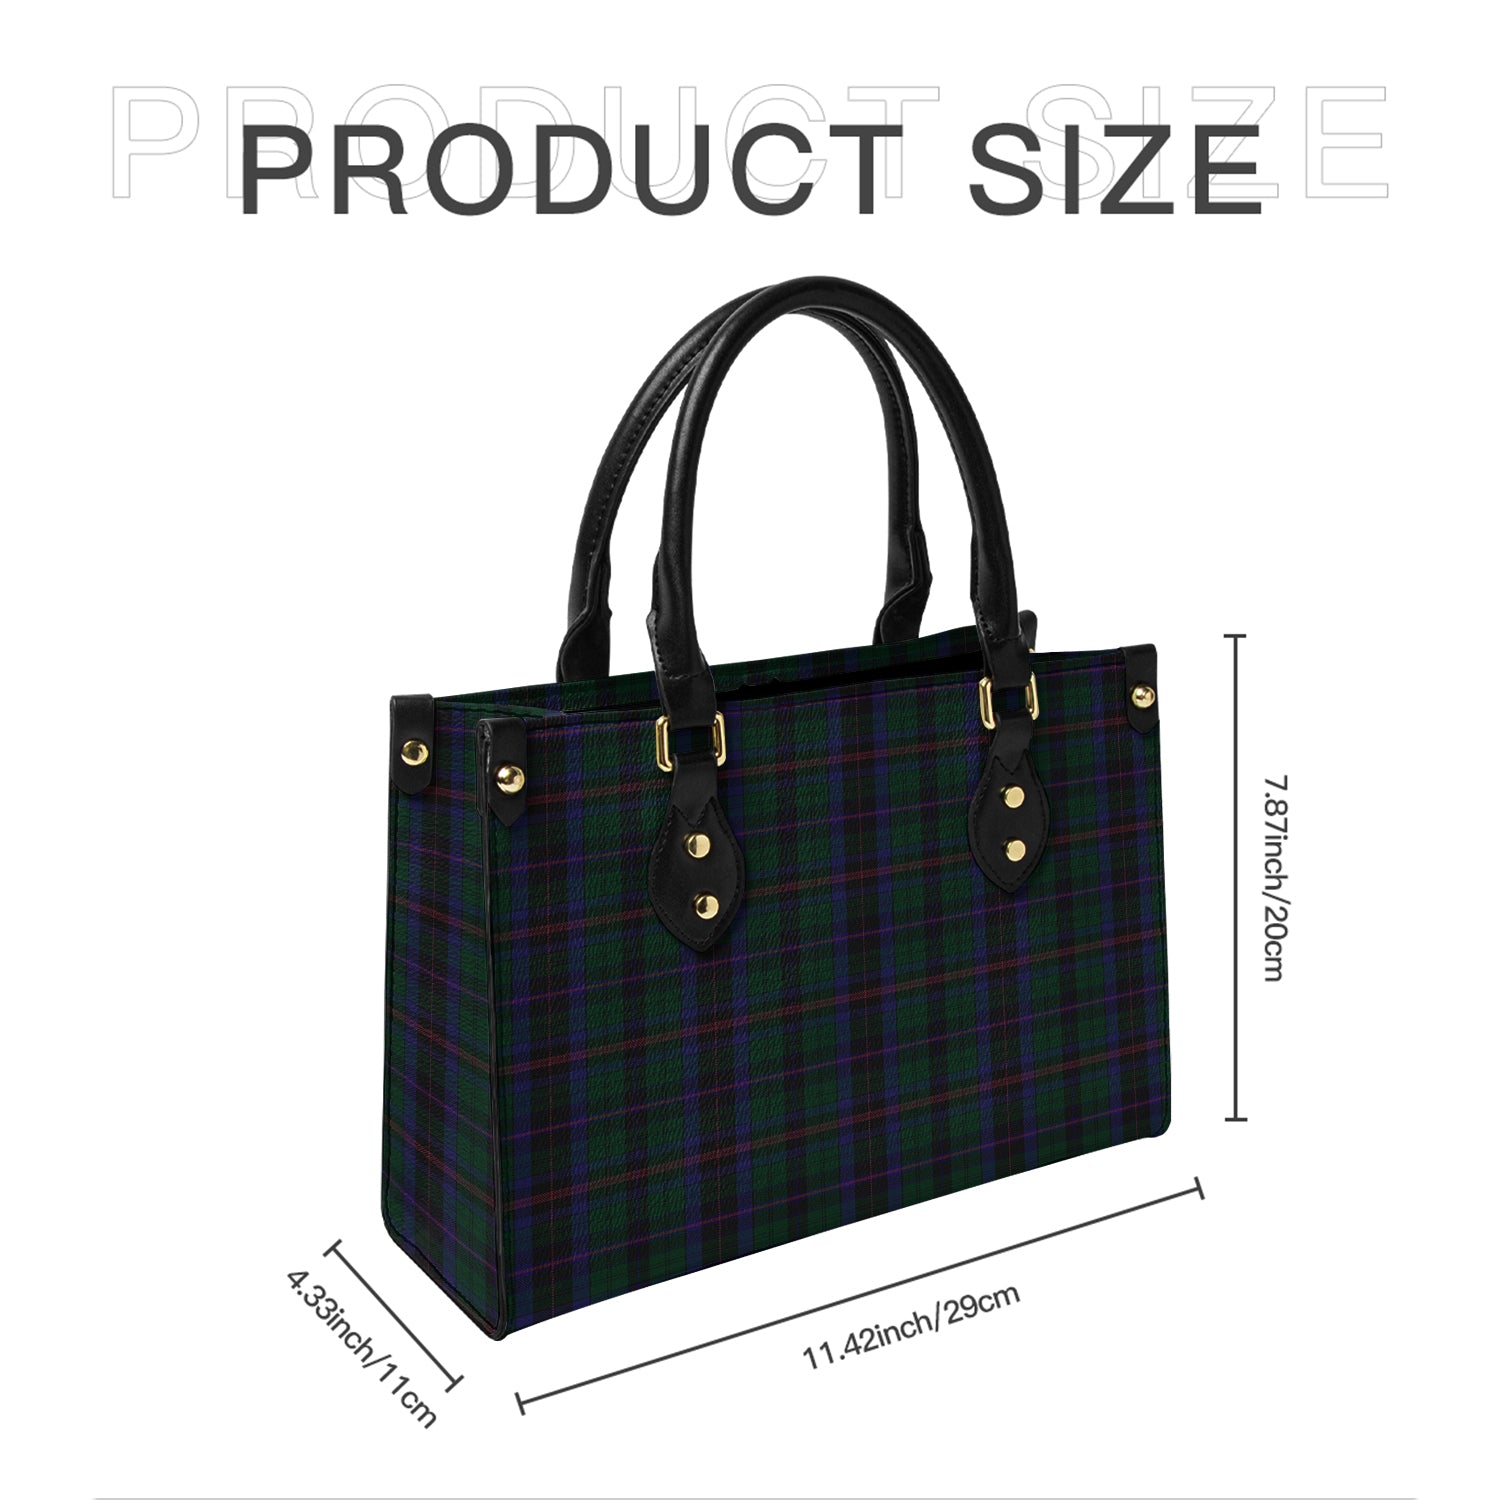 phillips-of-wales-tartan-leather-bag